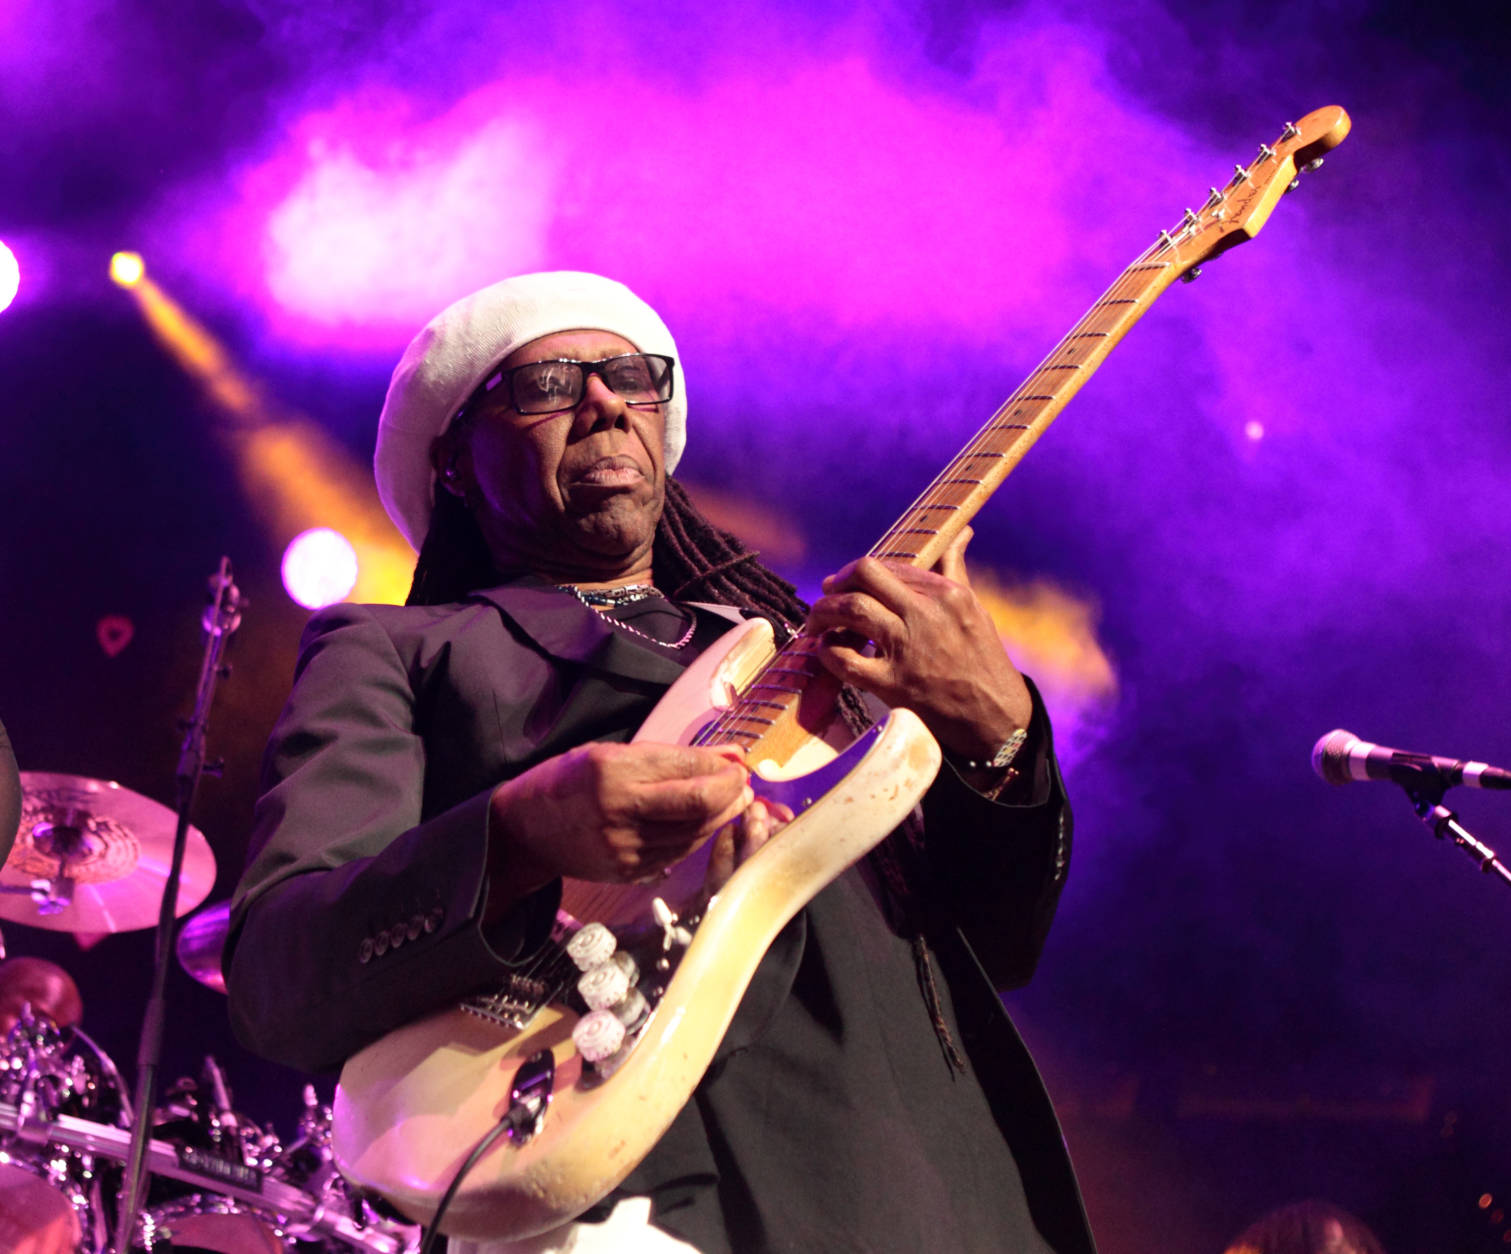 Nile Rodgers of the band Chic performs in concert as the opening act for Duran Duran during their Paper Gods Tour 2016 at the Verizon Center on Friday, April 8, 2016, in Washington D.C. (Photo by Owen Sweeney/Invision/AP)